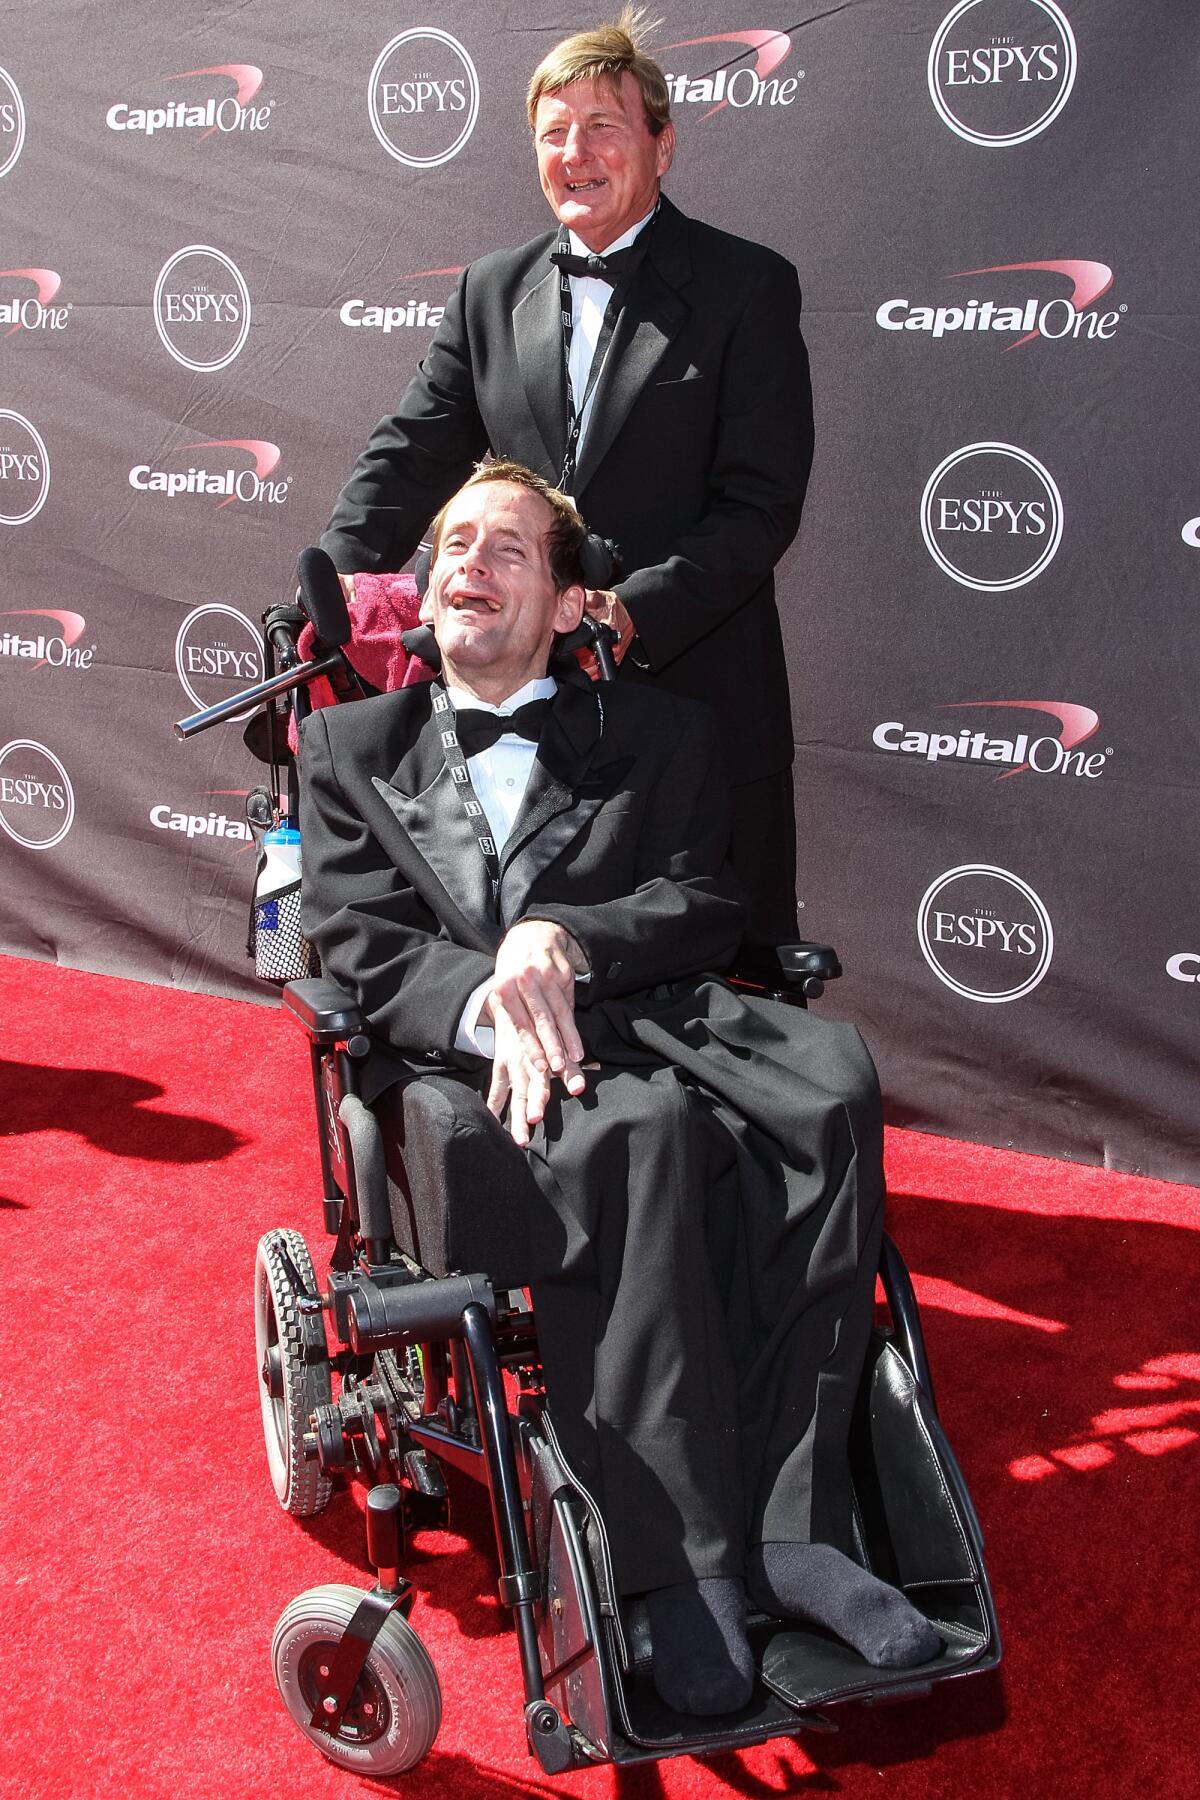 Dick and Rick Hoyt attend the ESPY Awards in Los Angeles on July 17, 2013.